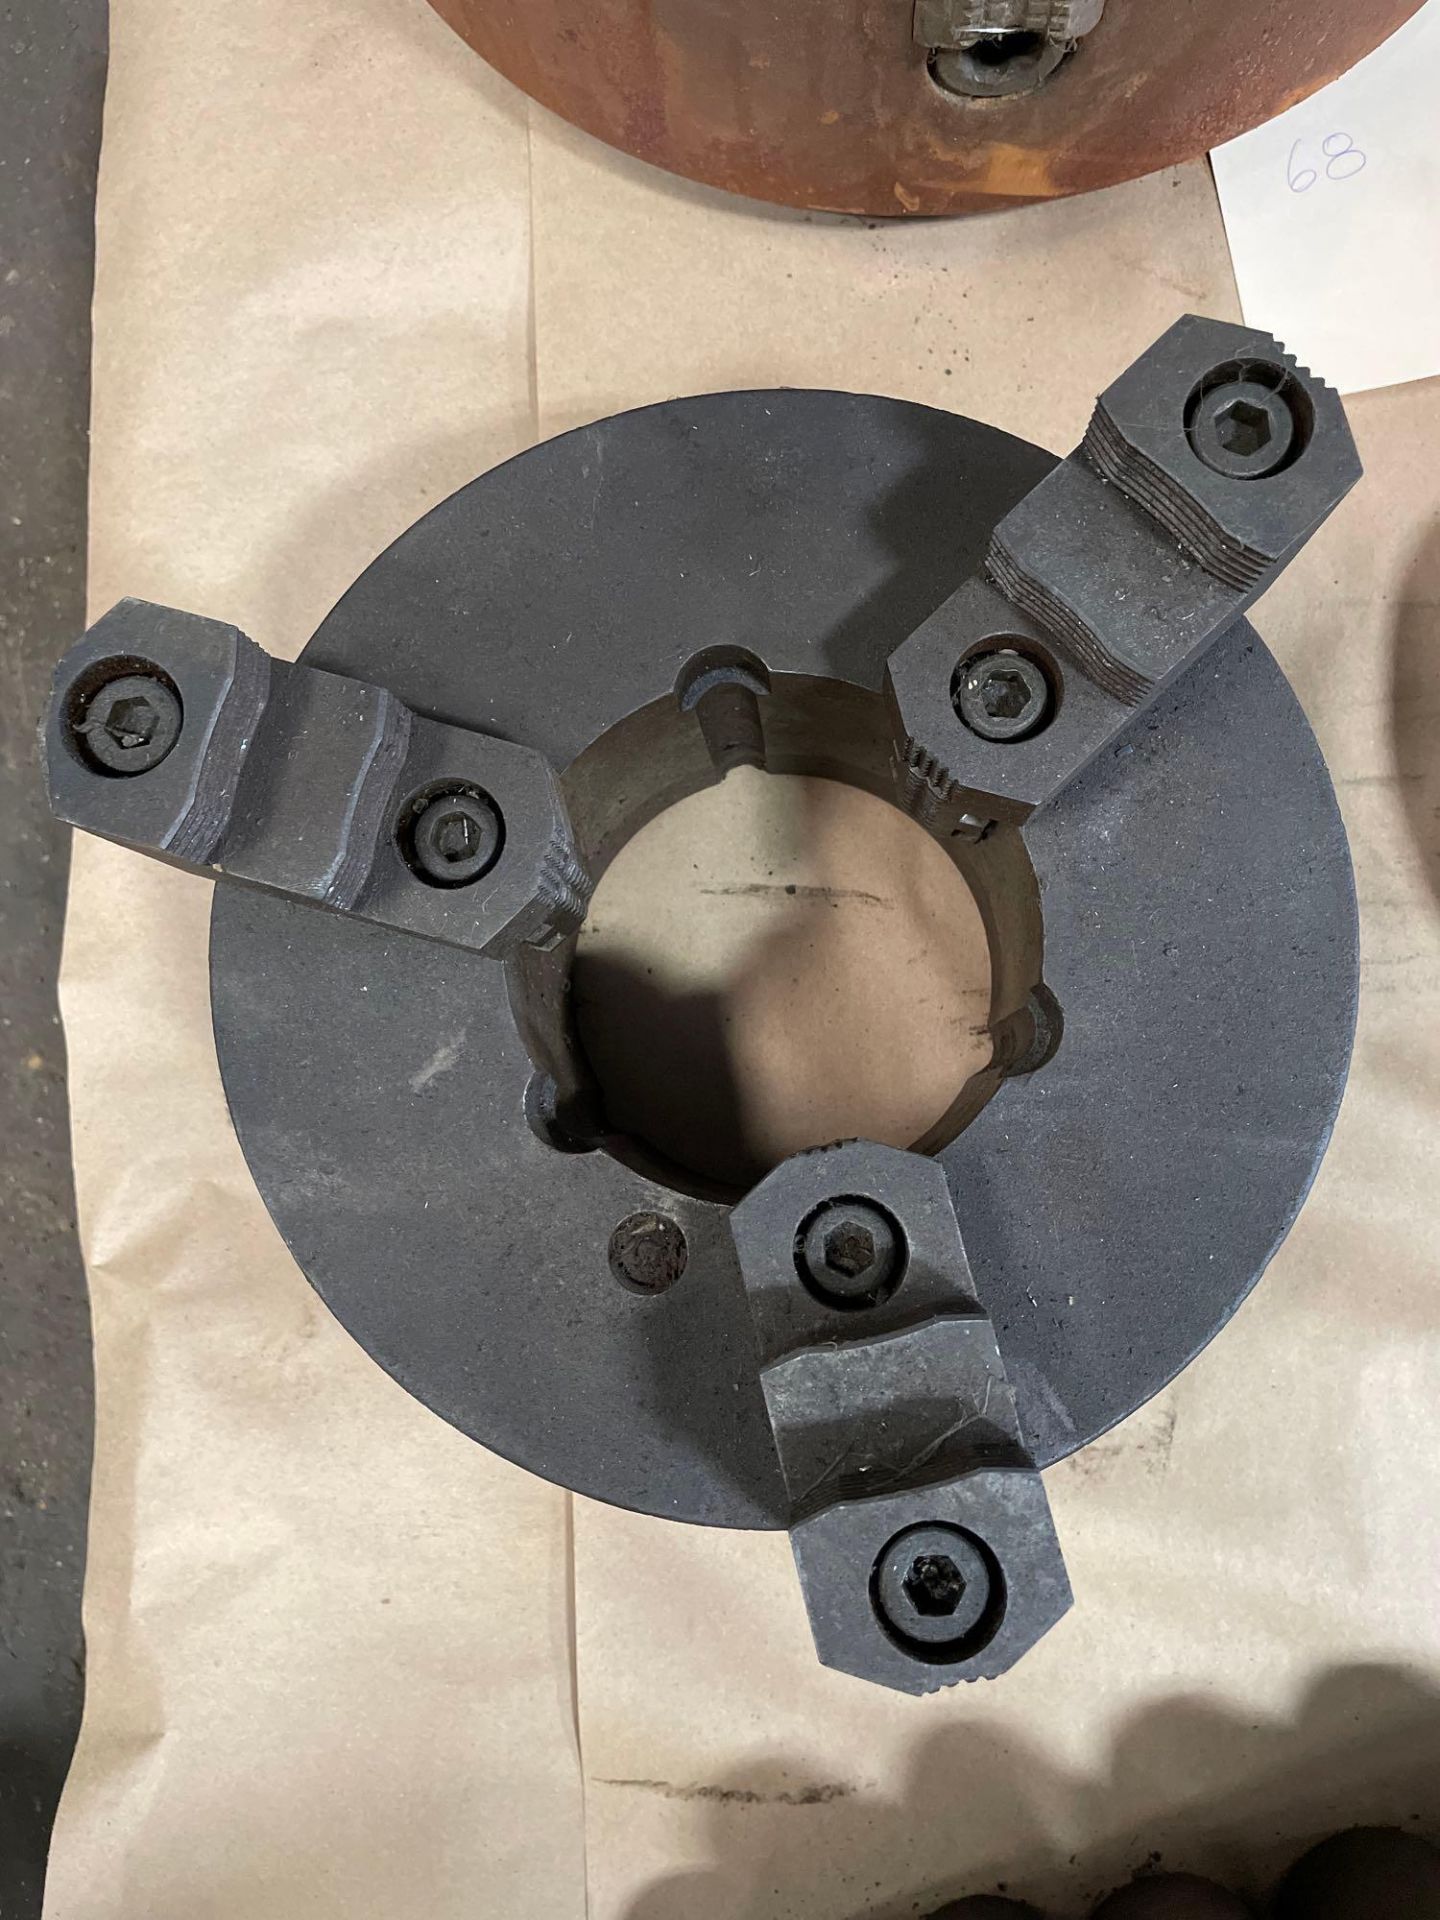 Lot of 3 Chucks: (1) 8" 3-Jaw Chuck, (1) 10" 3-Jaw Chuck, (1) 10" 3-Jaw Chuck - Image 2 of 7